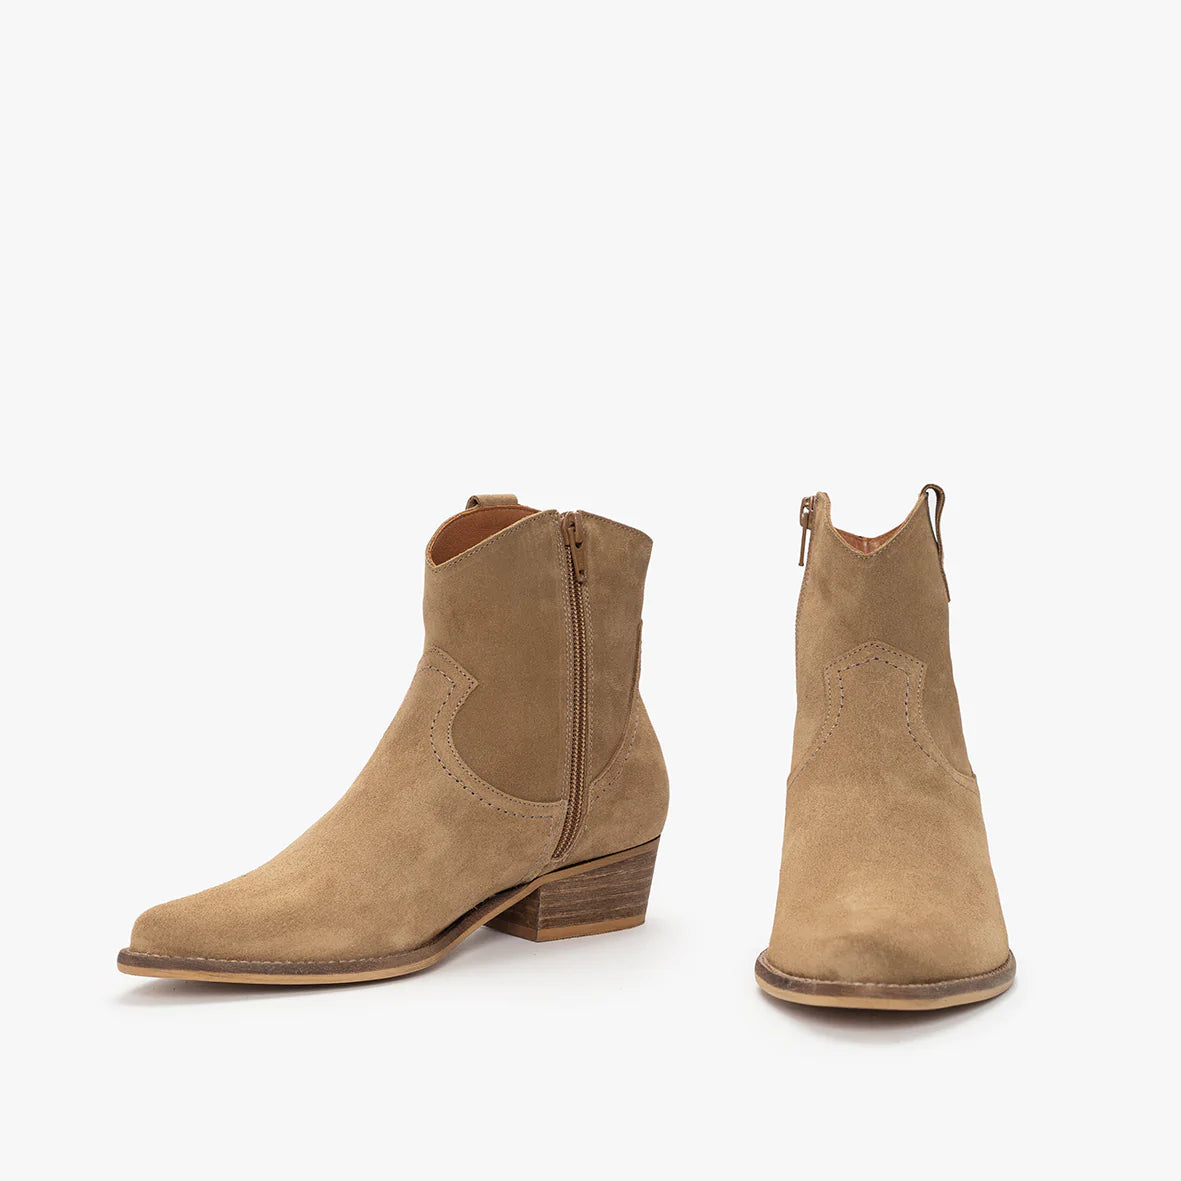 SOFT BROWN LEATHER CAMPER STYLE ANKLE BOOTS